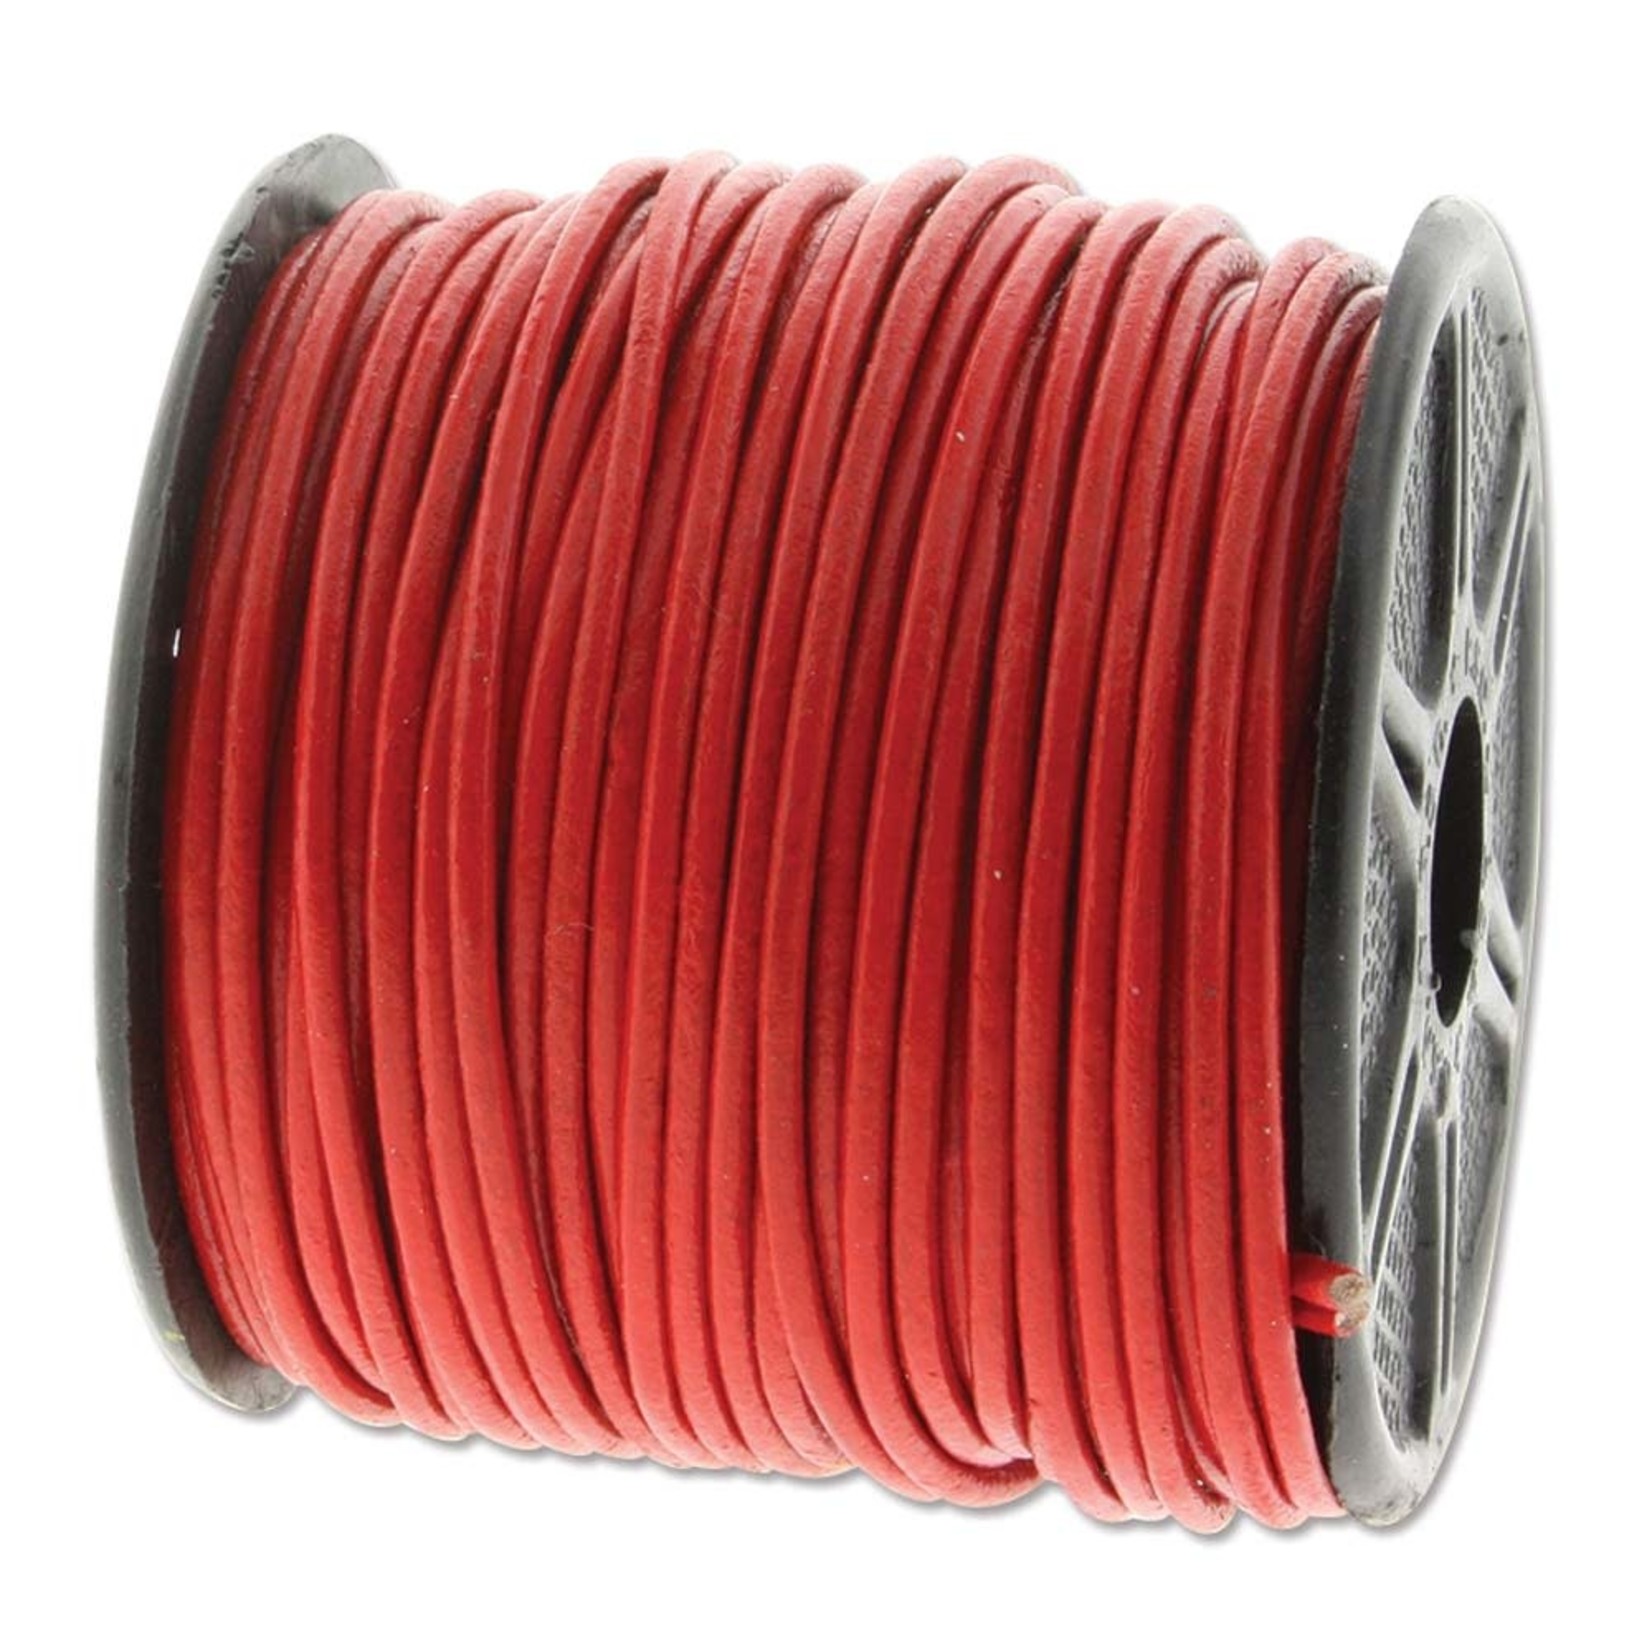 Leather Cord 1mm Round Cord Red - 1 foot